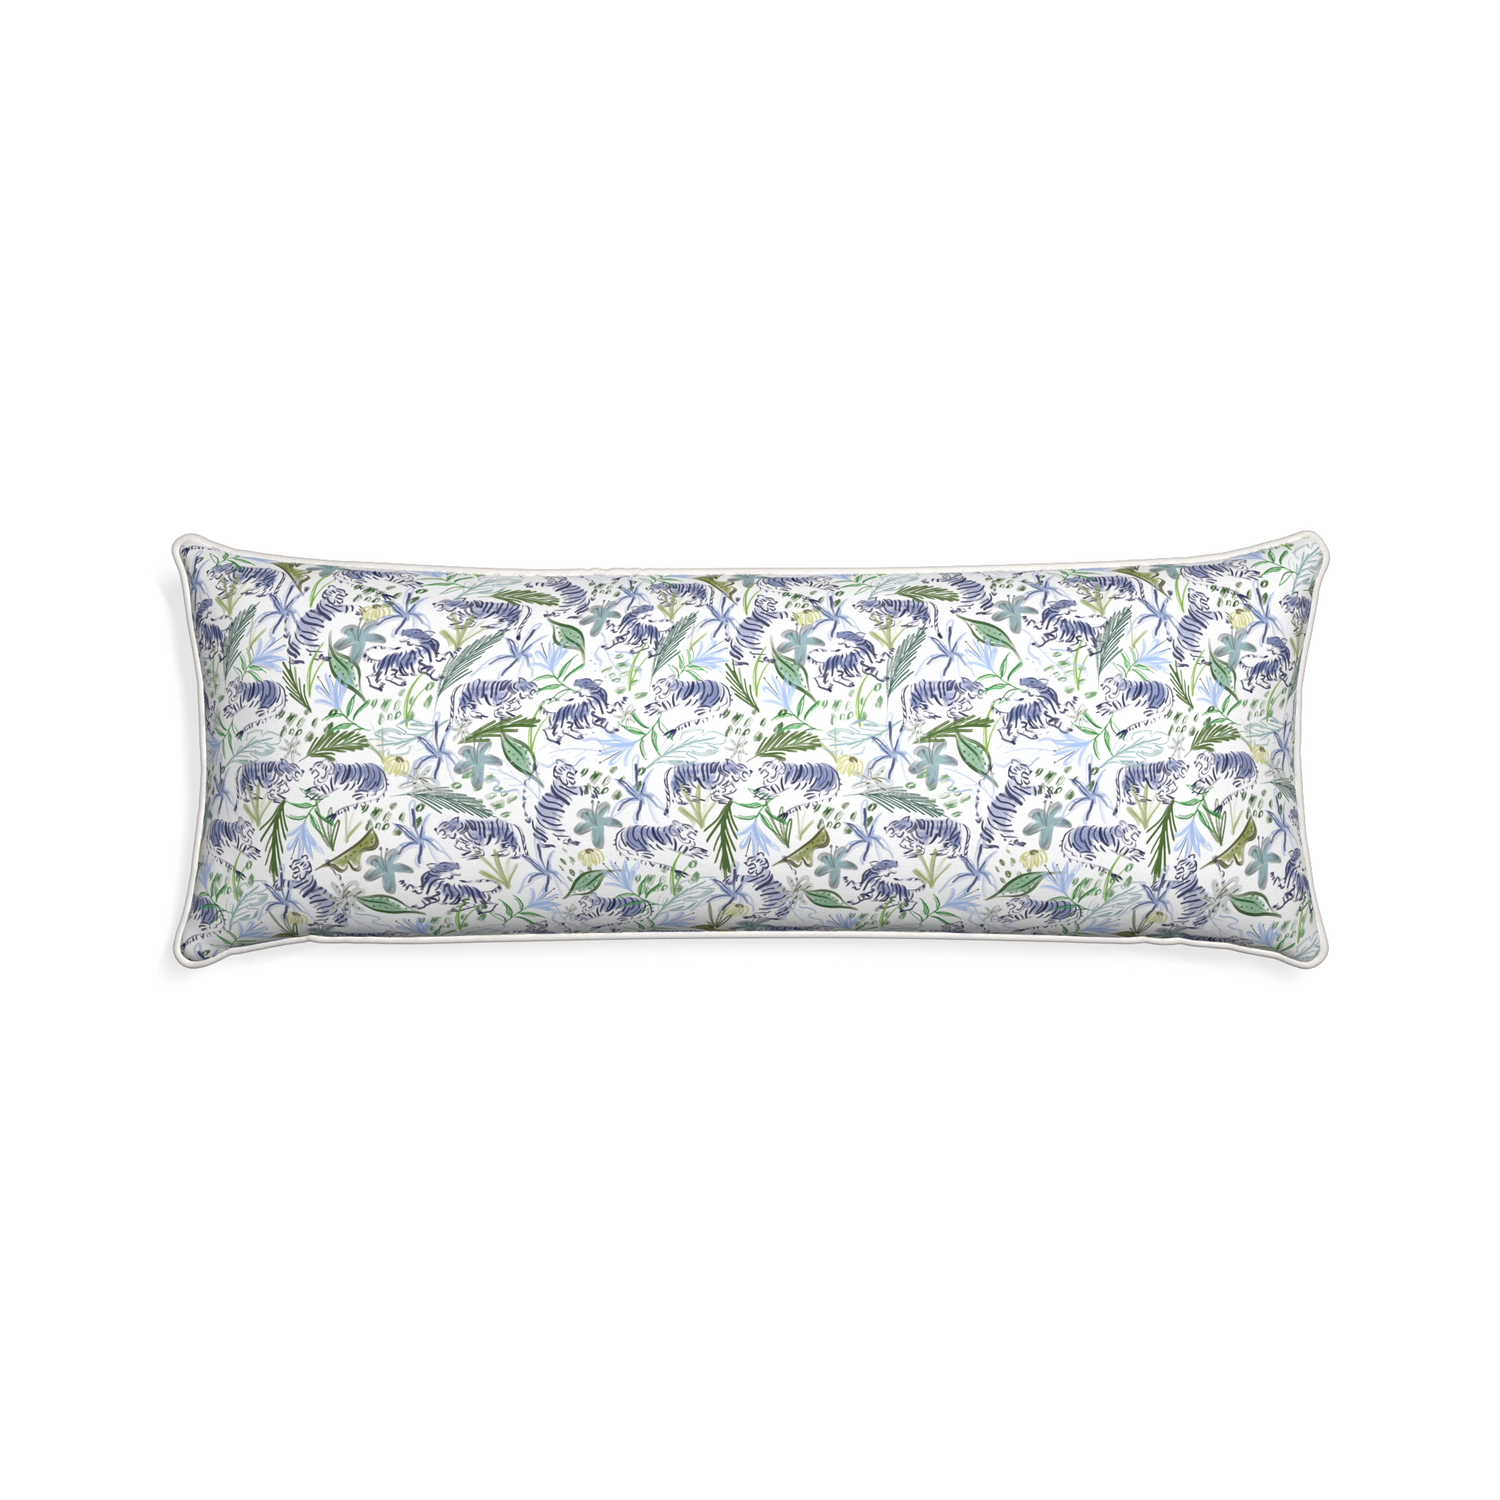 Xl-lumbar frida green custom pillow with snow piping on white background